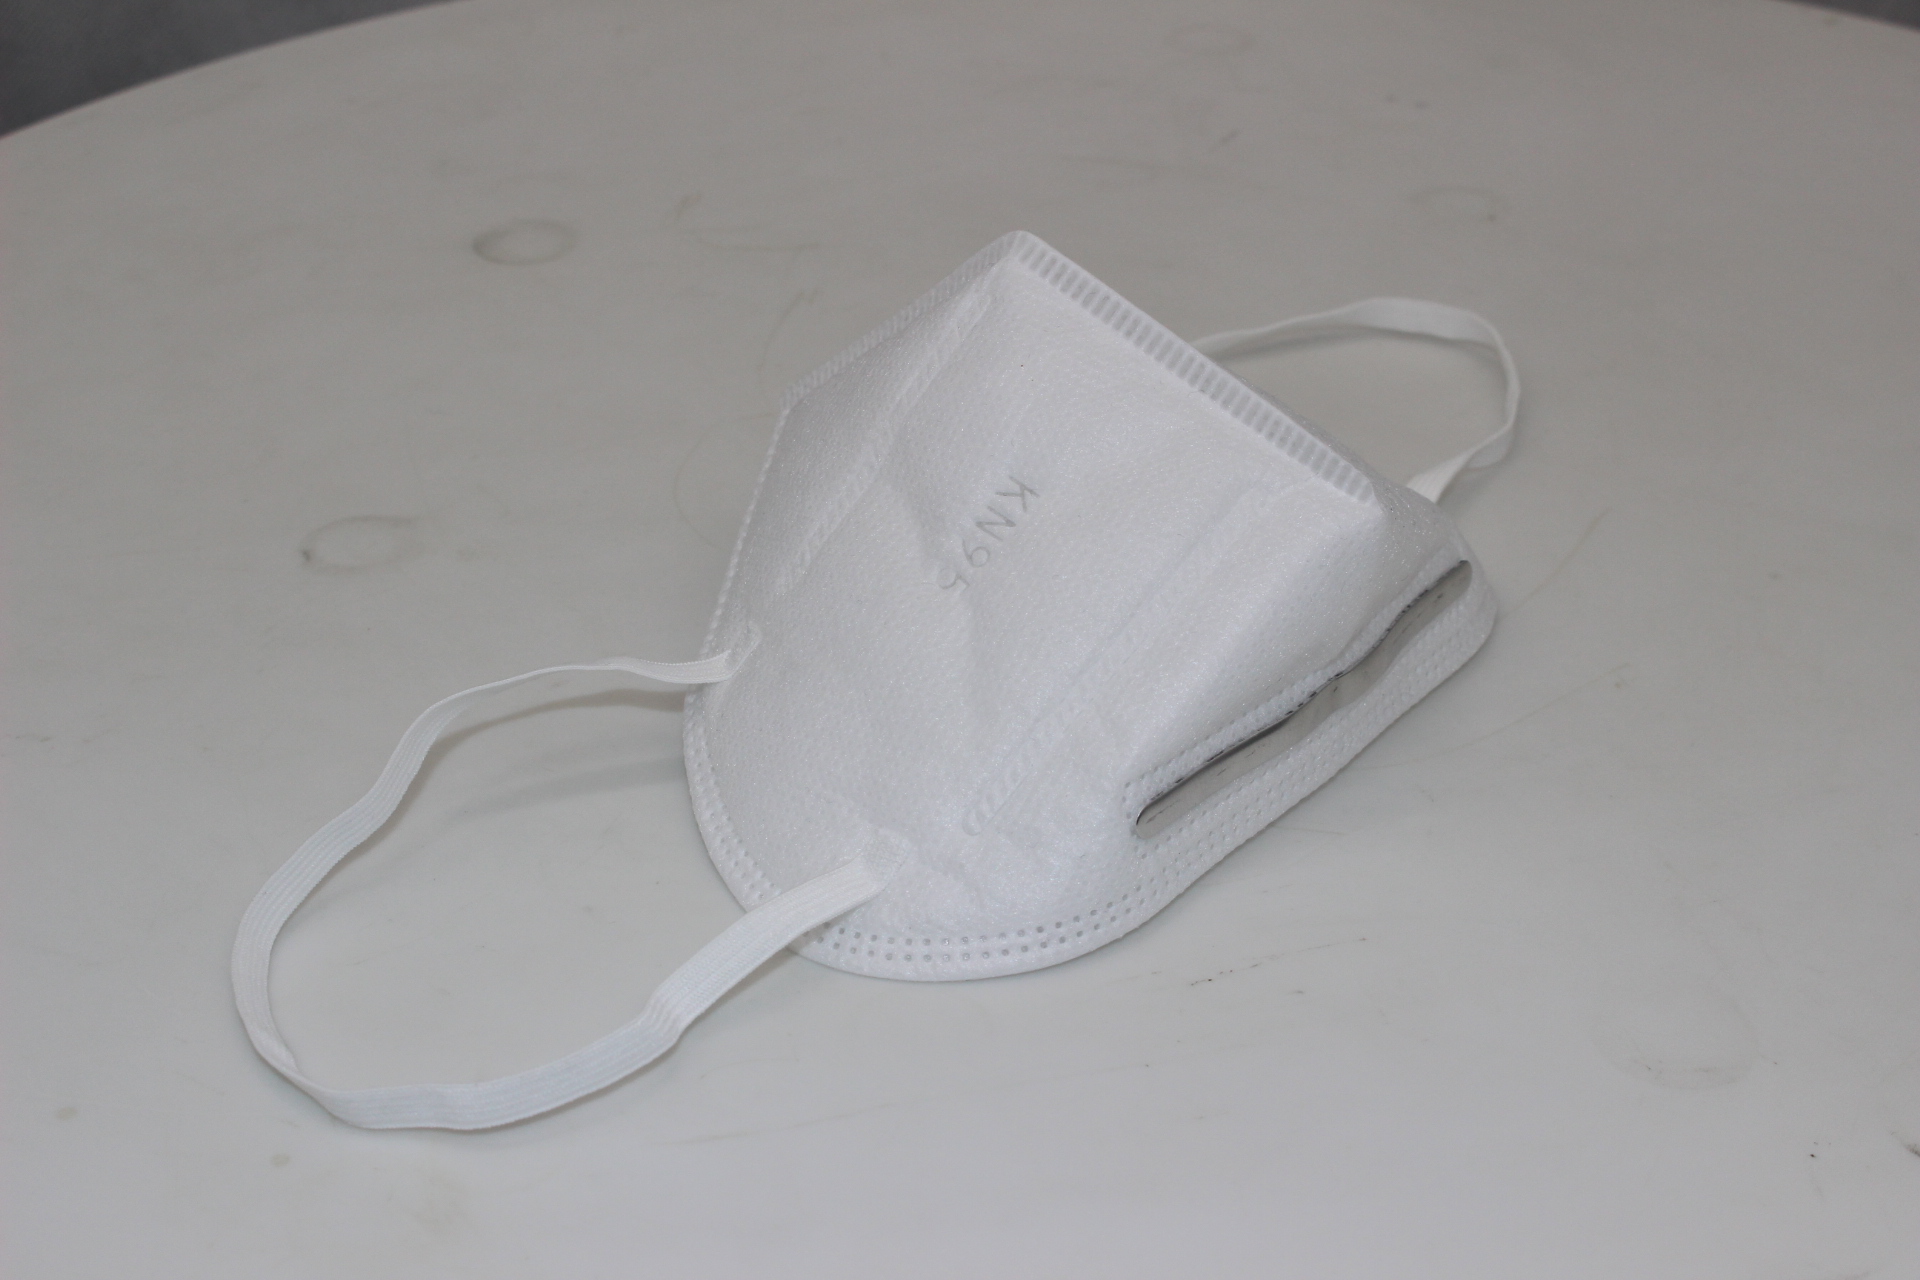 factory low price Iphone 6 Plus Parts -
 KN95 Mask Disposable Protective Mask Dust KN95 Face Masks manufacturer 5- Ply Non-woven  – Jiutu